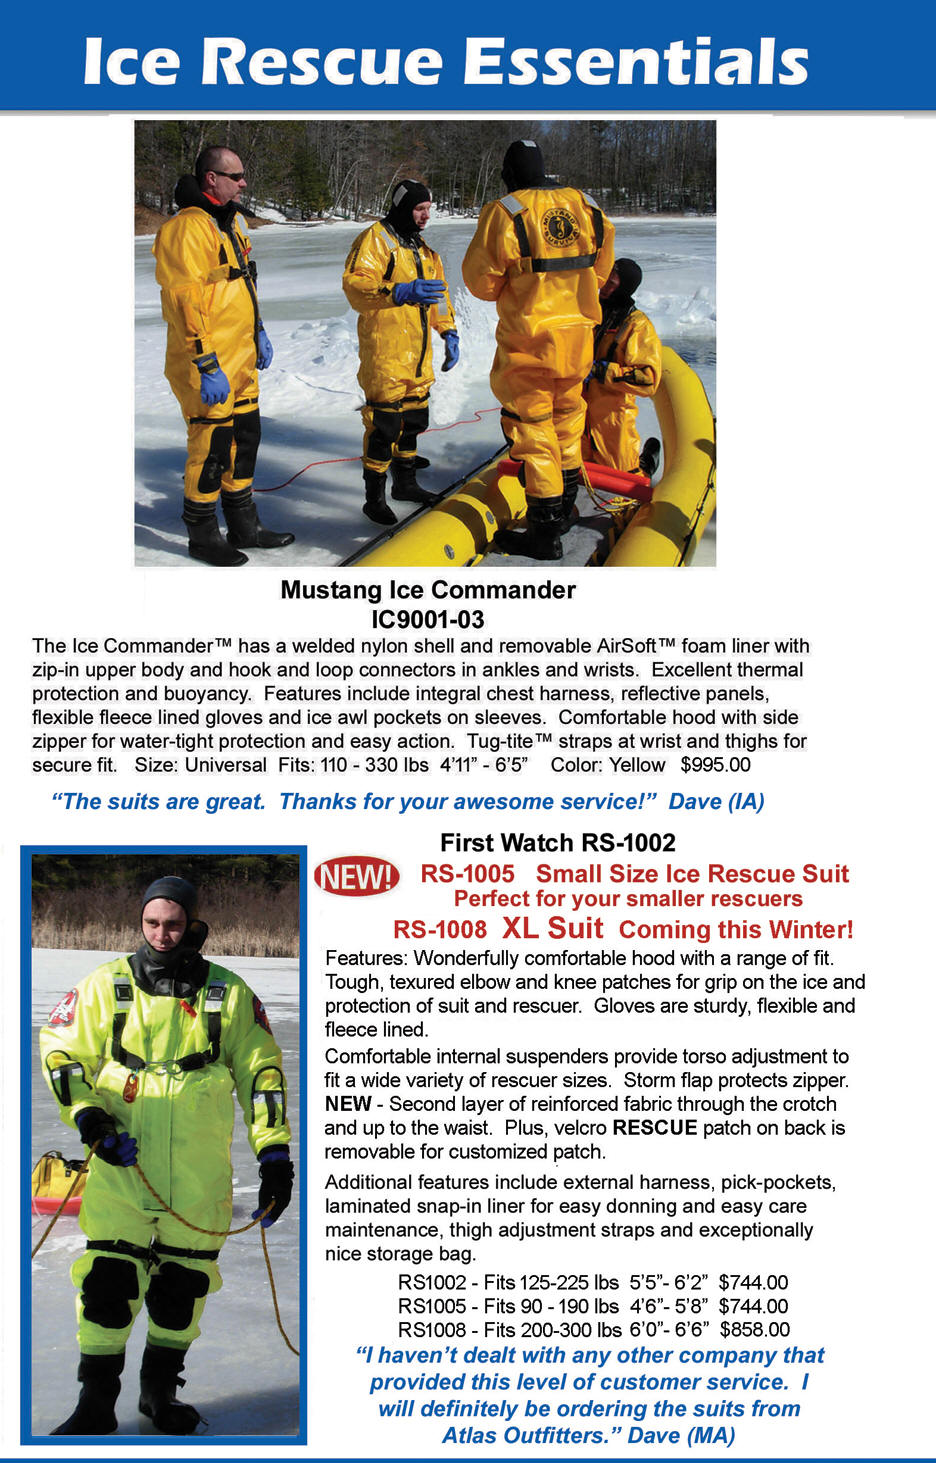 Mustang and First Watch Ice Rescue suits